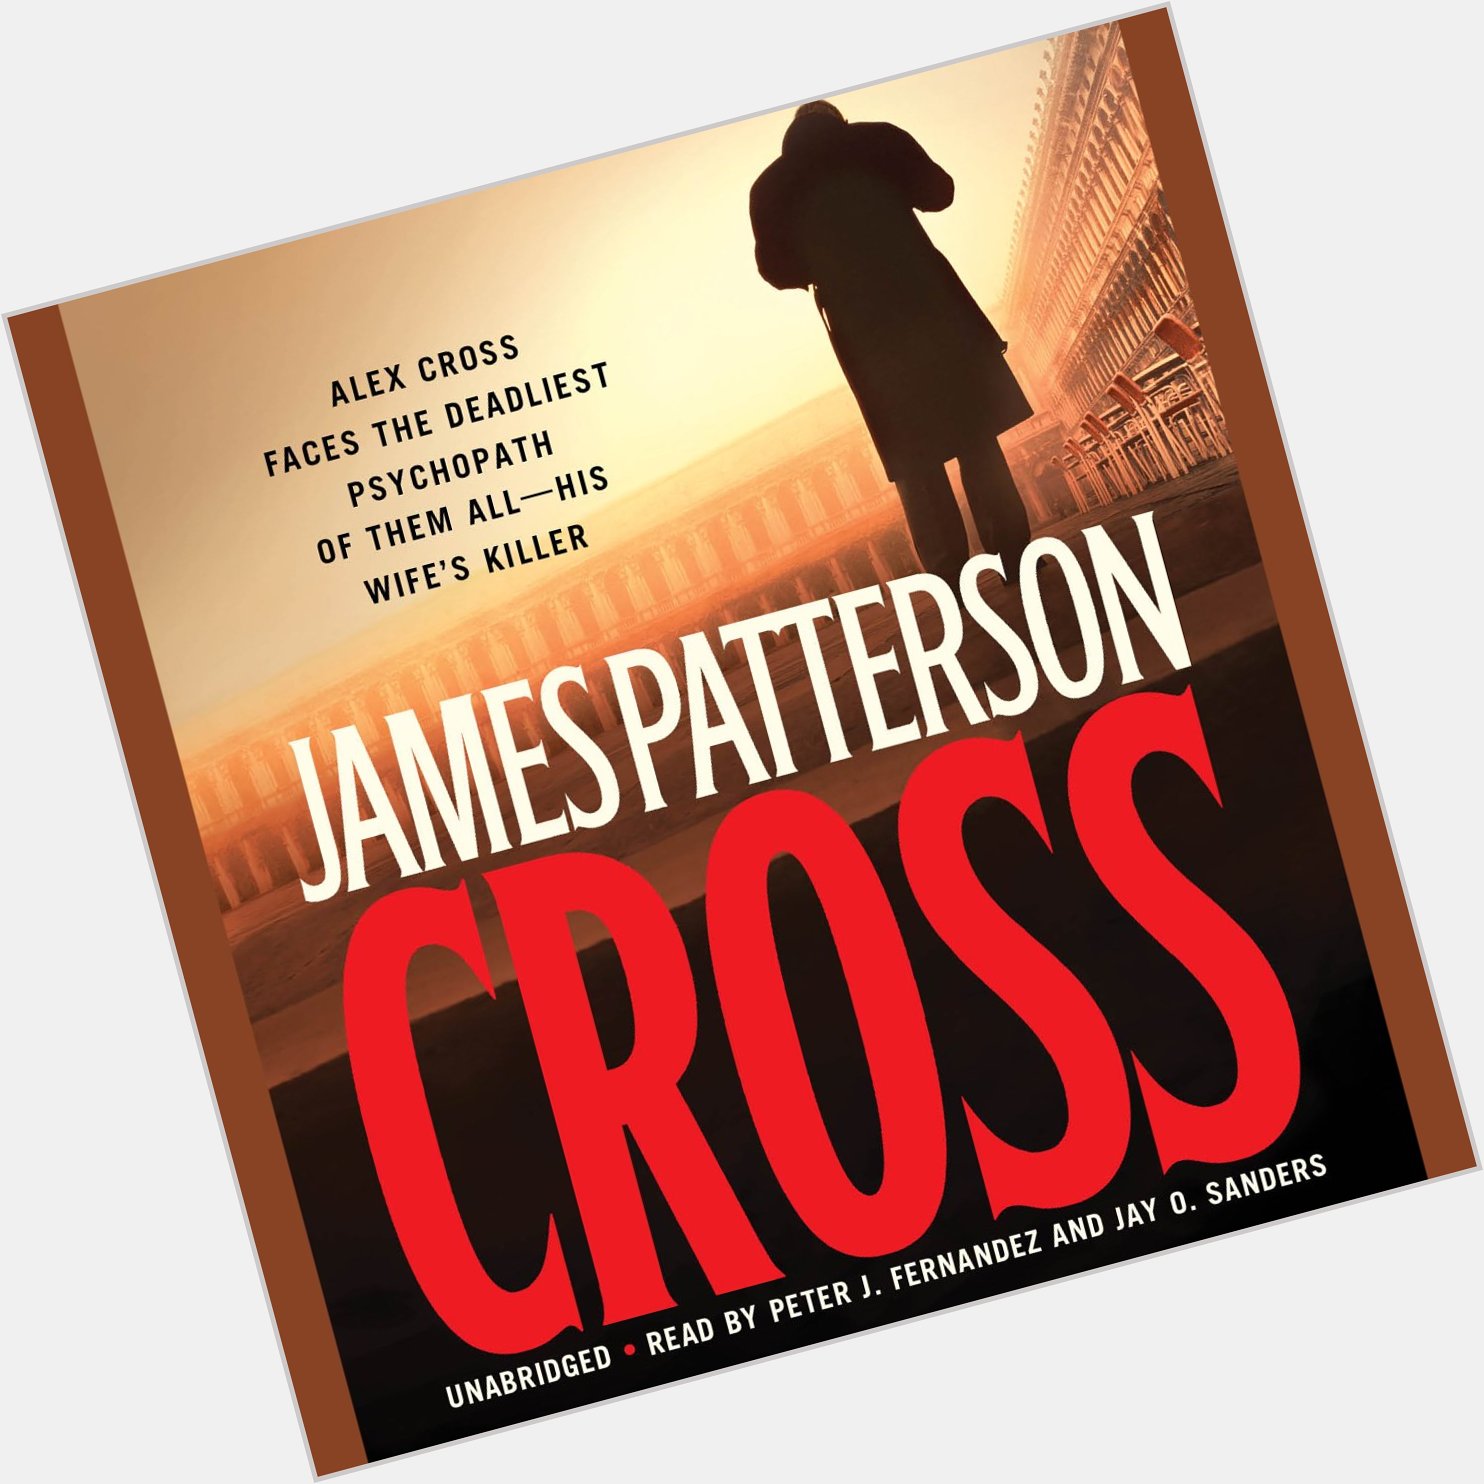 March 22, 1947: Happy birthday author James Patterson 